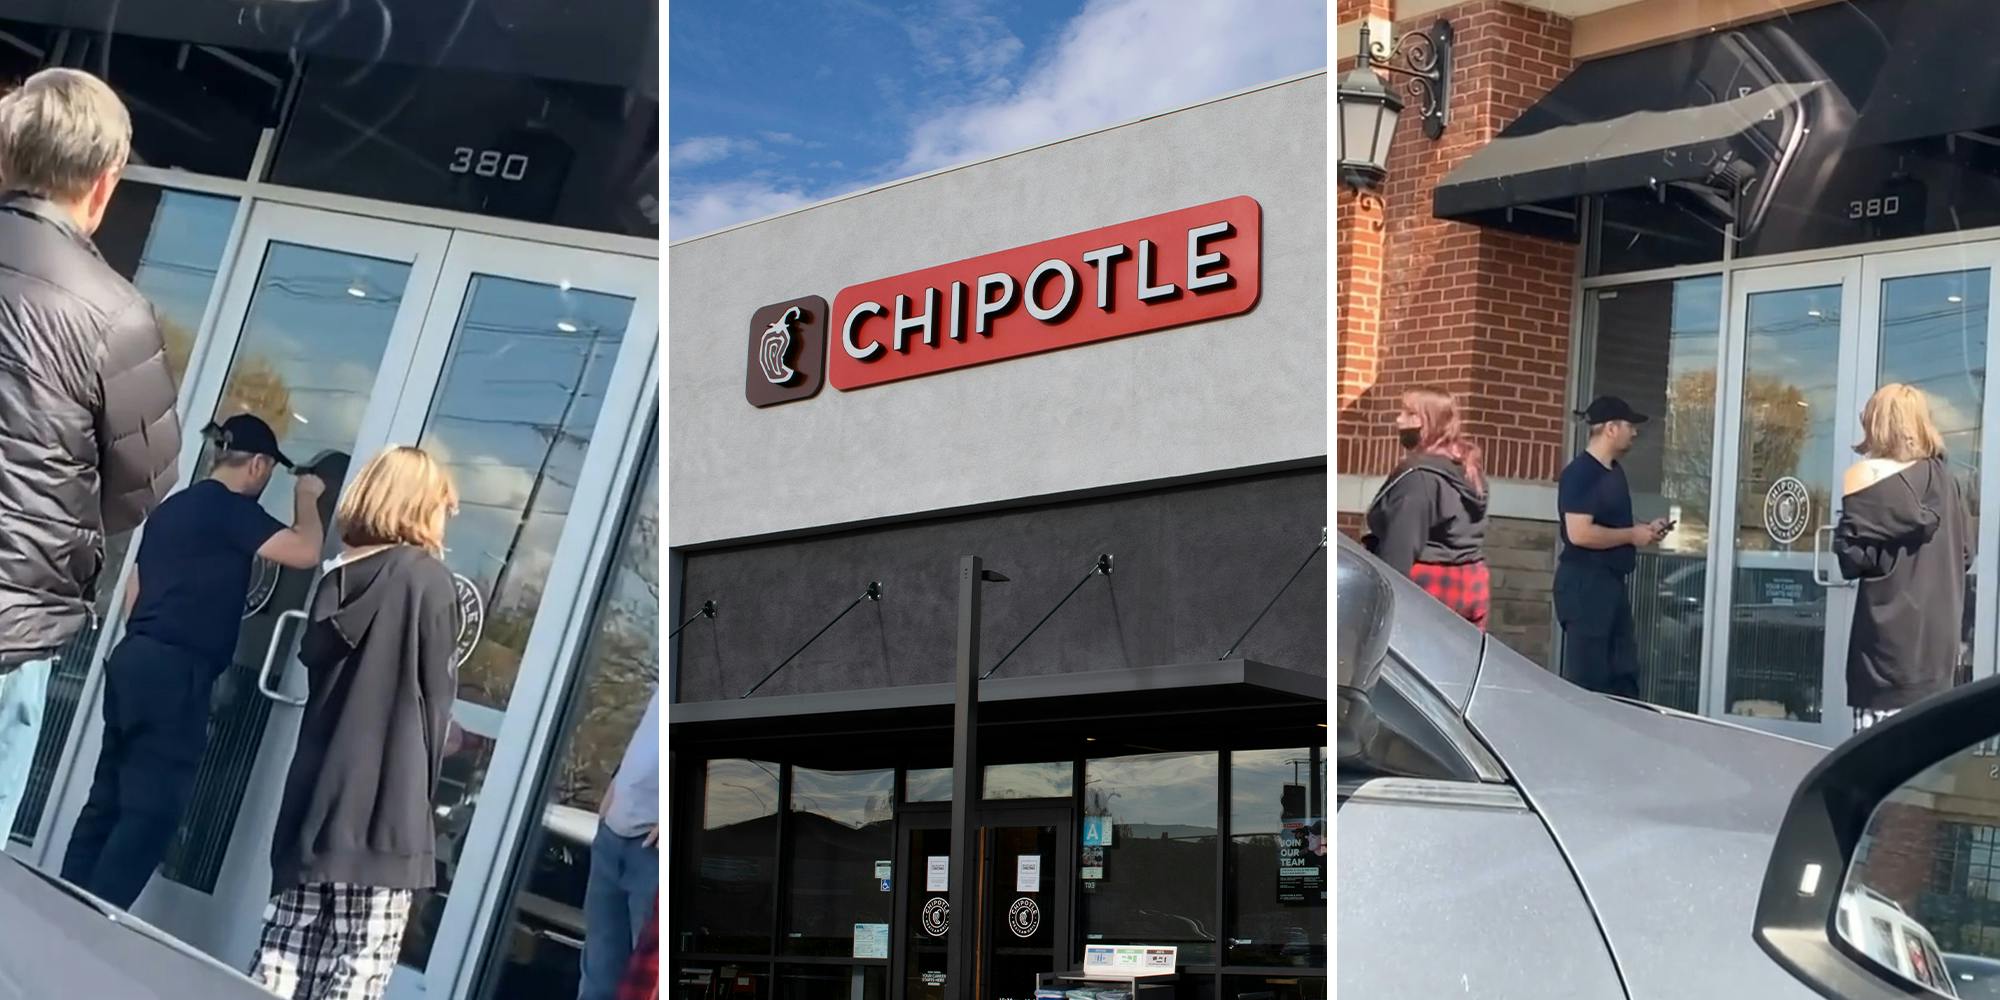 Over-eager Chipotle customers mocked for waiting for restaurant to open in morning